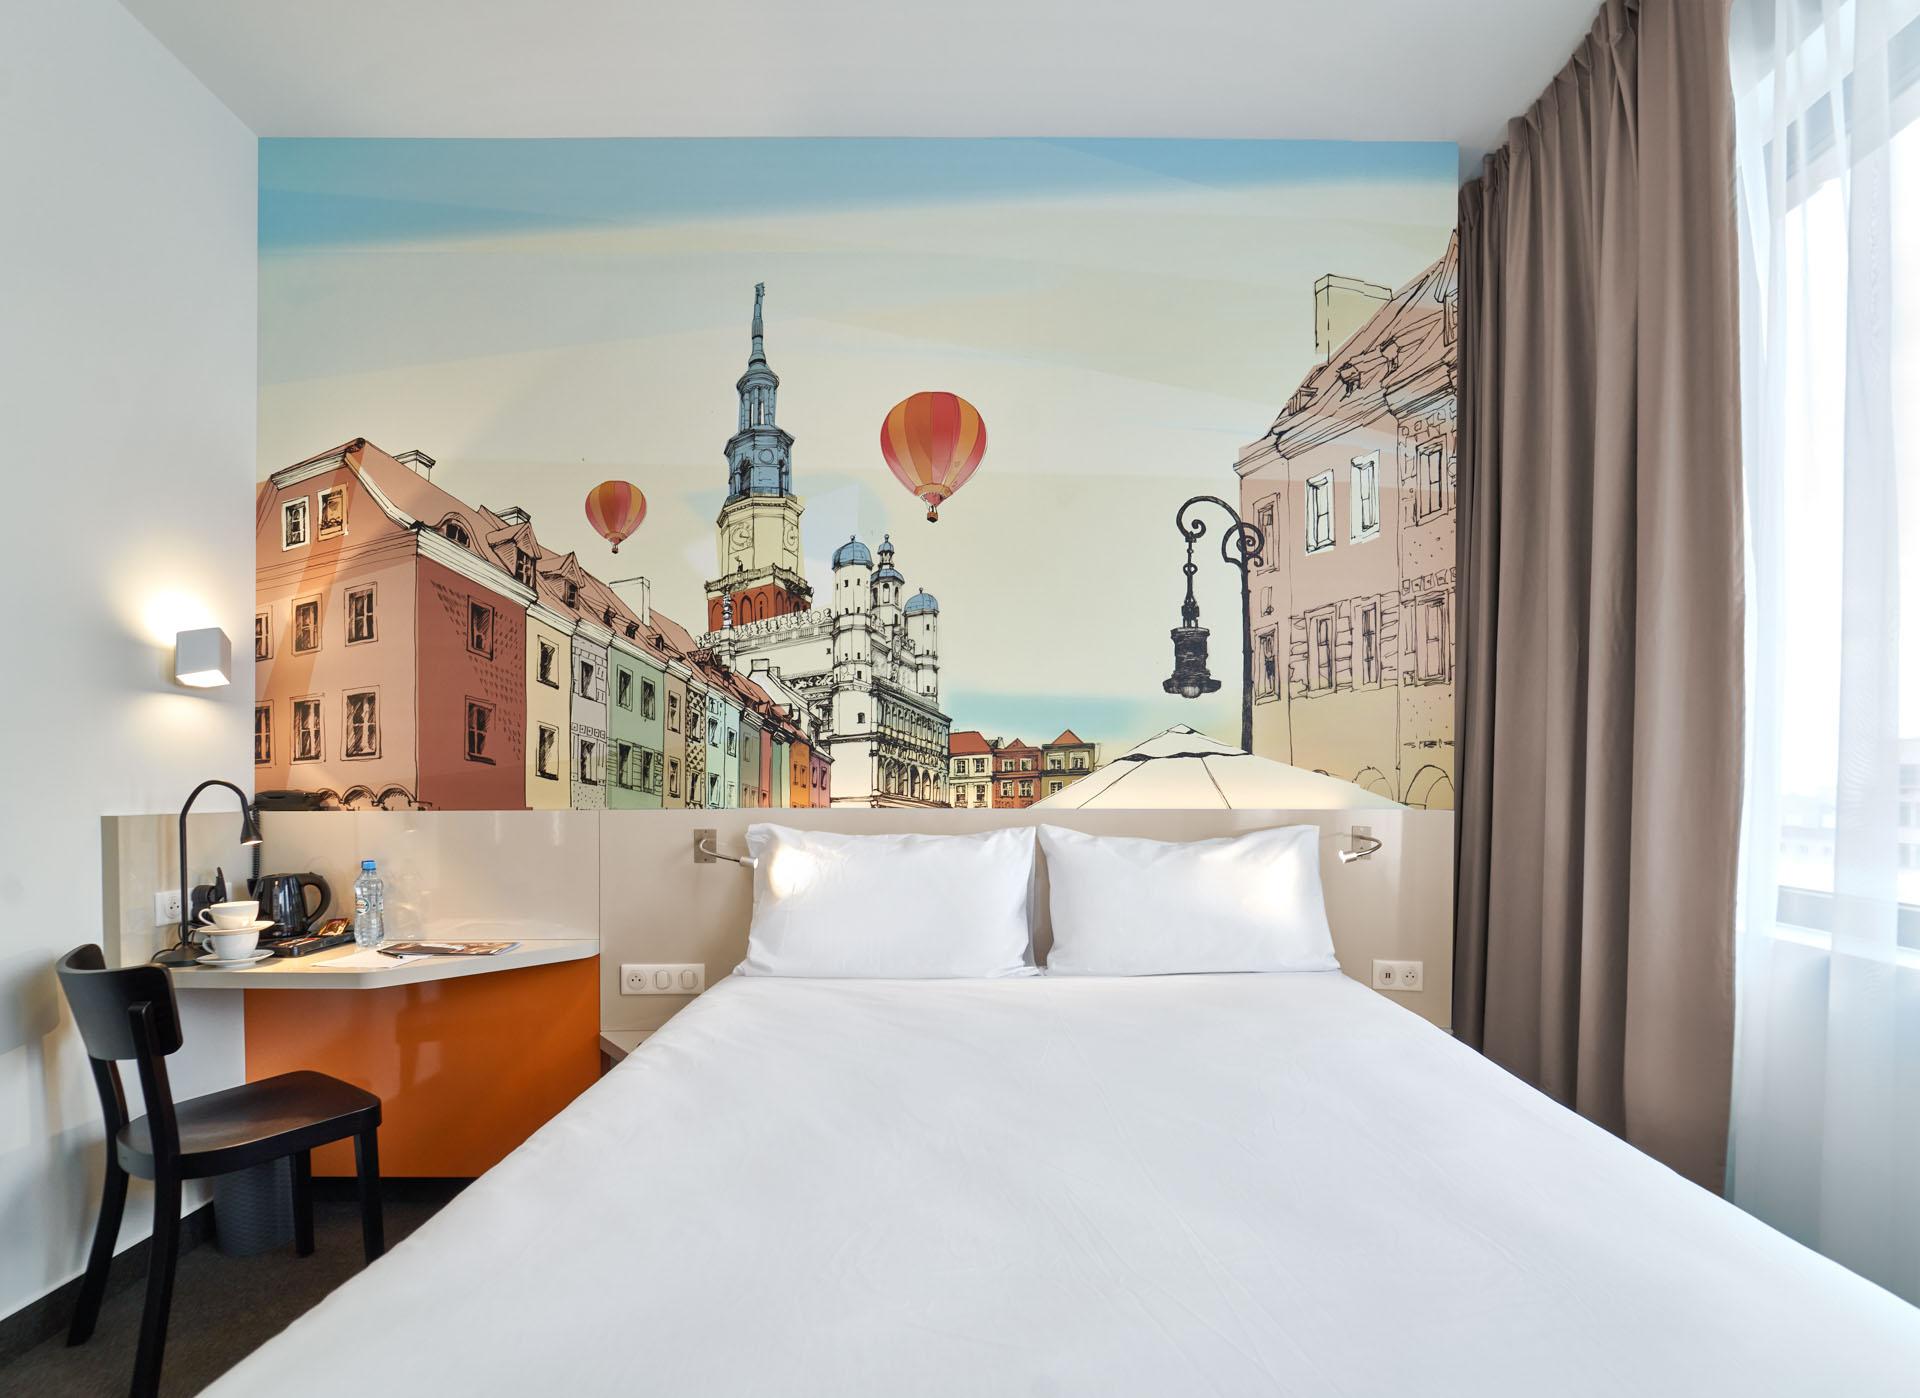 Images B&B HOTEL Poznań Old Town